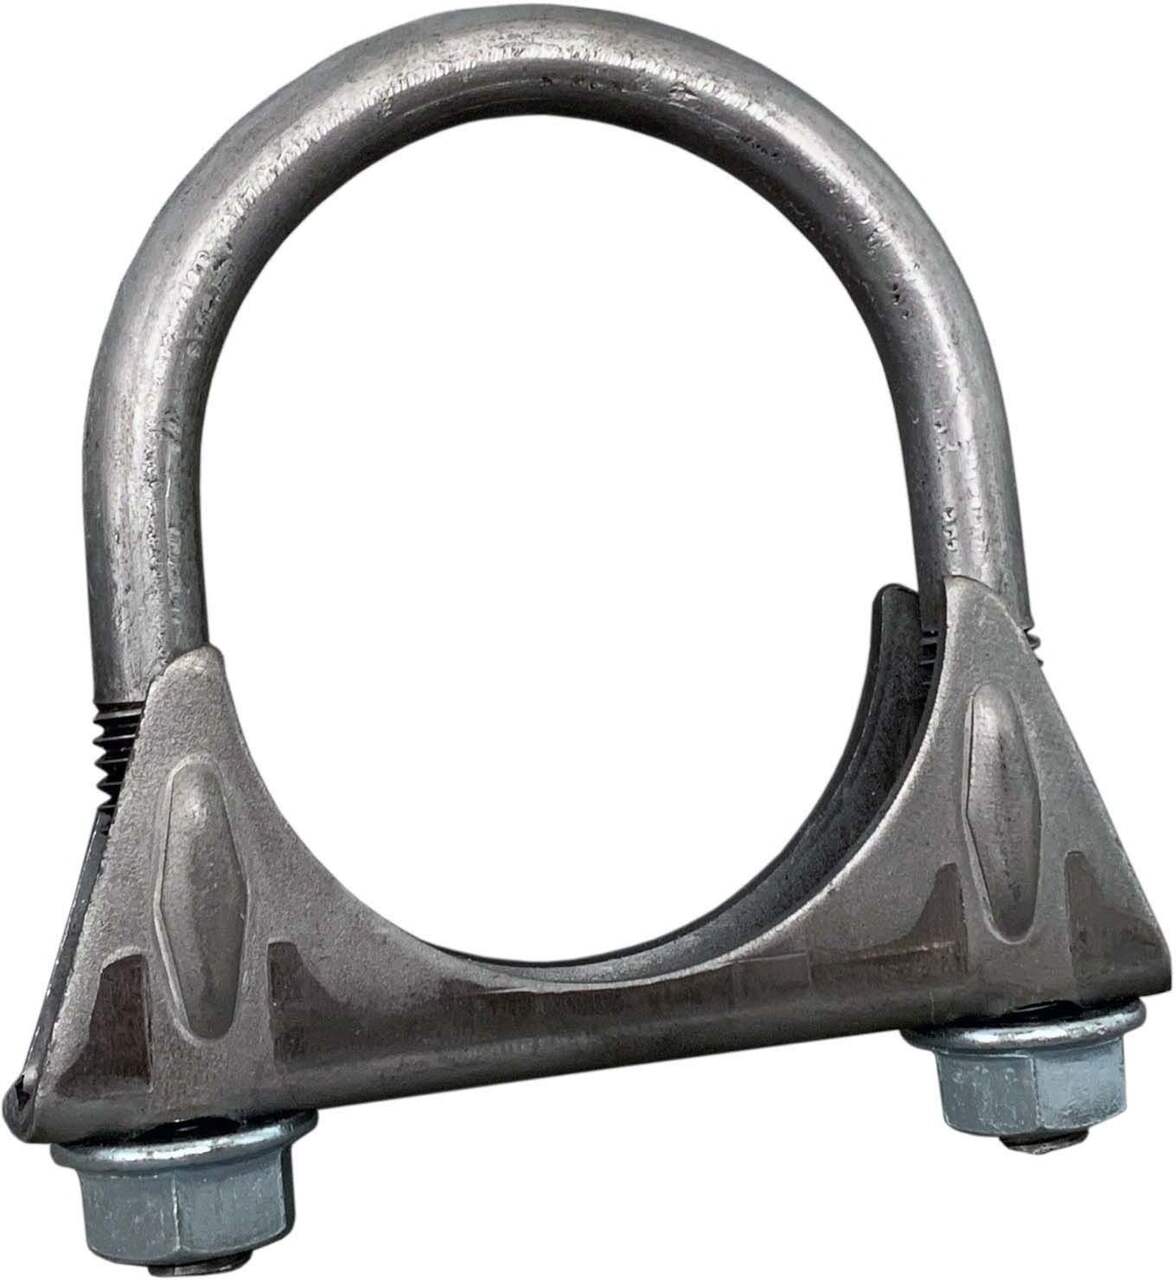 https://media-www.canadiantire.ca/product/automotive/heavy-auto-parts/exhaust/1128503/17133-5-clamp-c776866c-273a-4199-83a0-43c0a8f23aee-jpgrendition.jpg?imdensity=1&imwidth=640&impolicy=mZoom